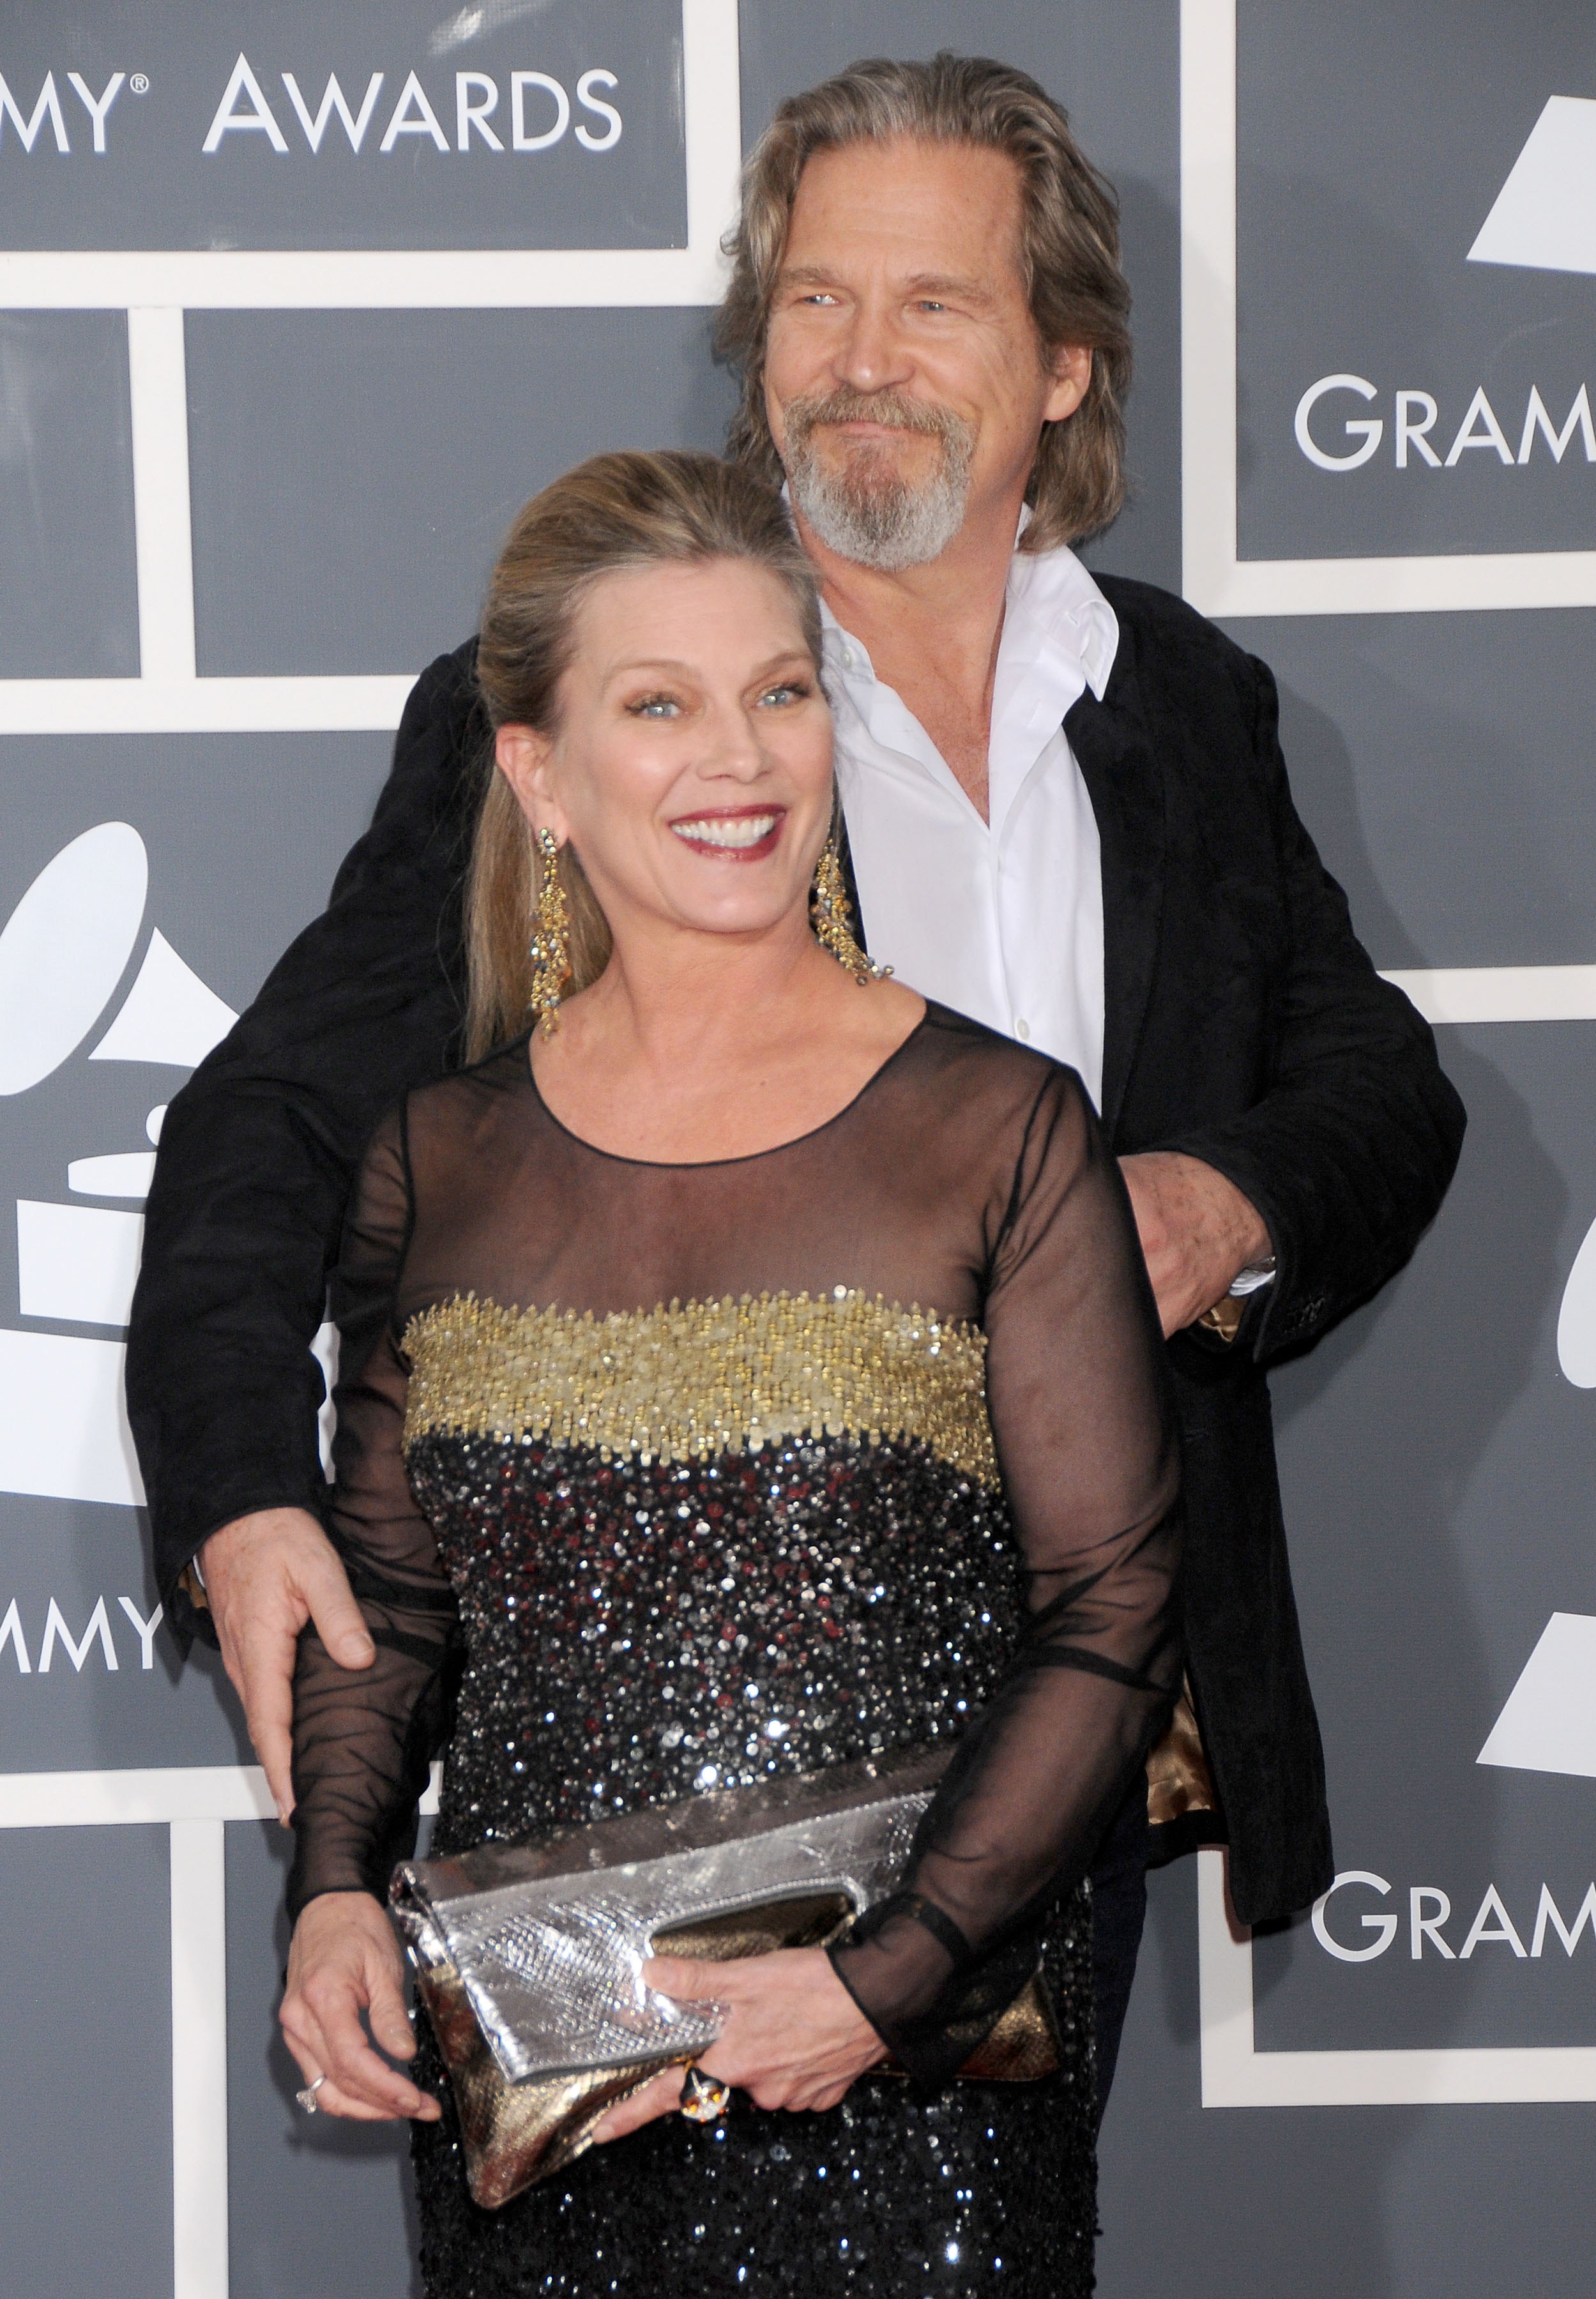 Jeff and Susan Bridges arrive at the 52nd Annual GRAMMY Awards held at the Nokia Theater in Los Angeles, California on January 31, 2010. | Source: Getty Images